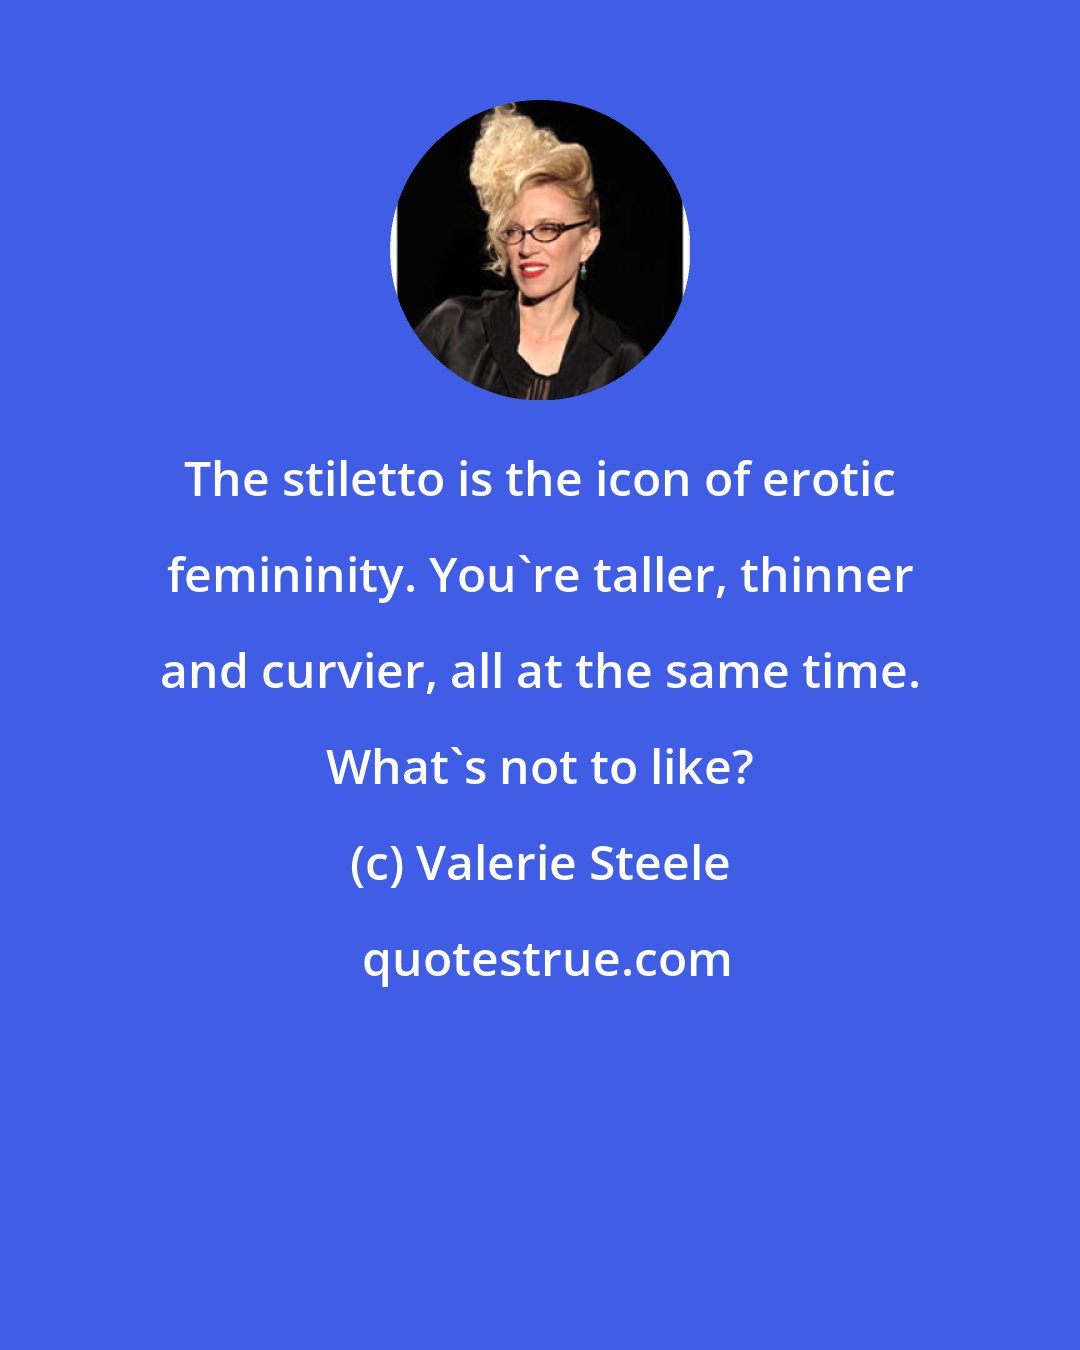 Valerie Steele: The stiletto is the icon of erotic femininity. You're taller, thinner and curvier, all at the same time. What's not to like?